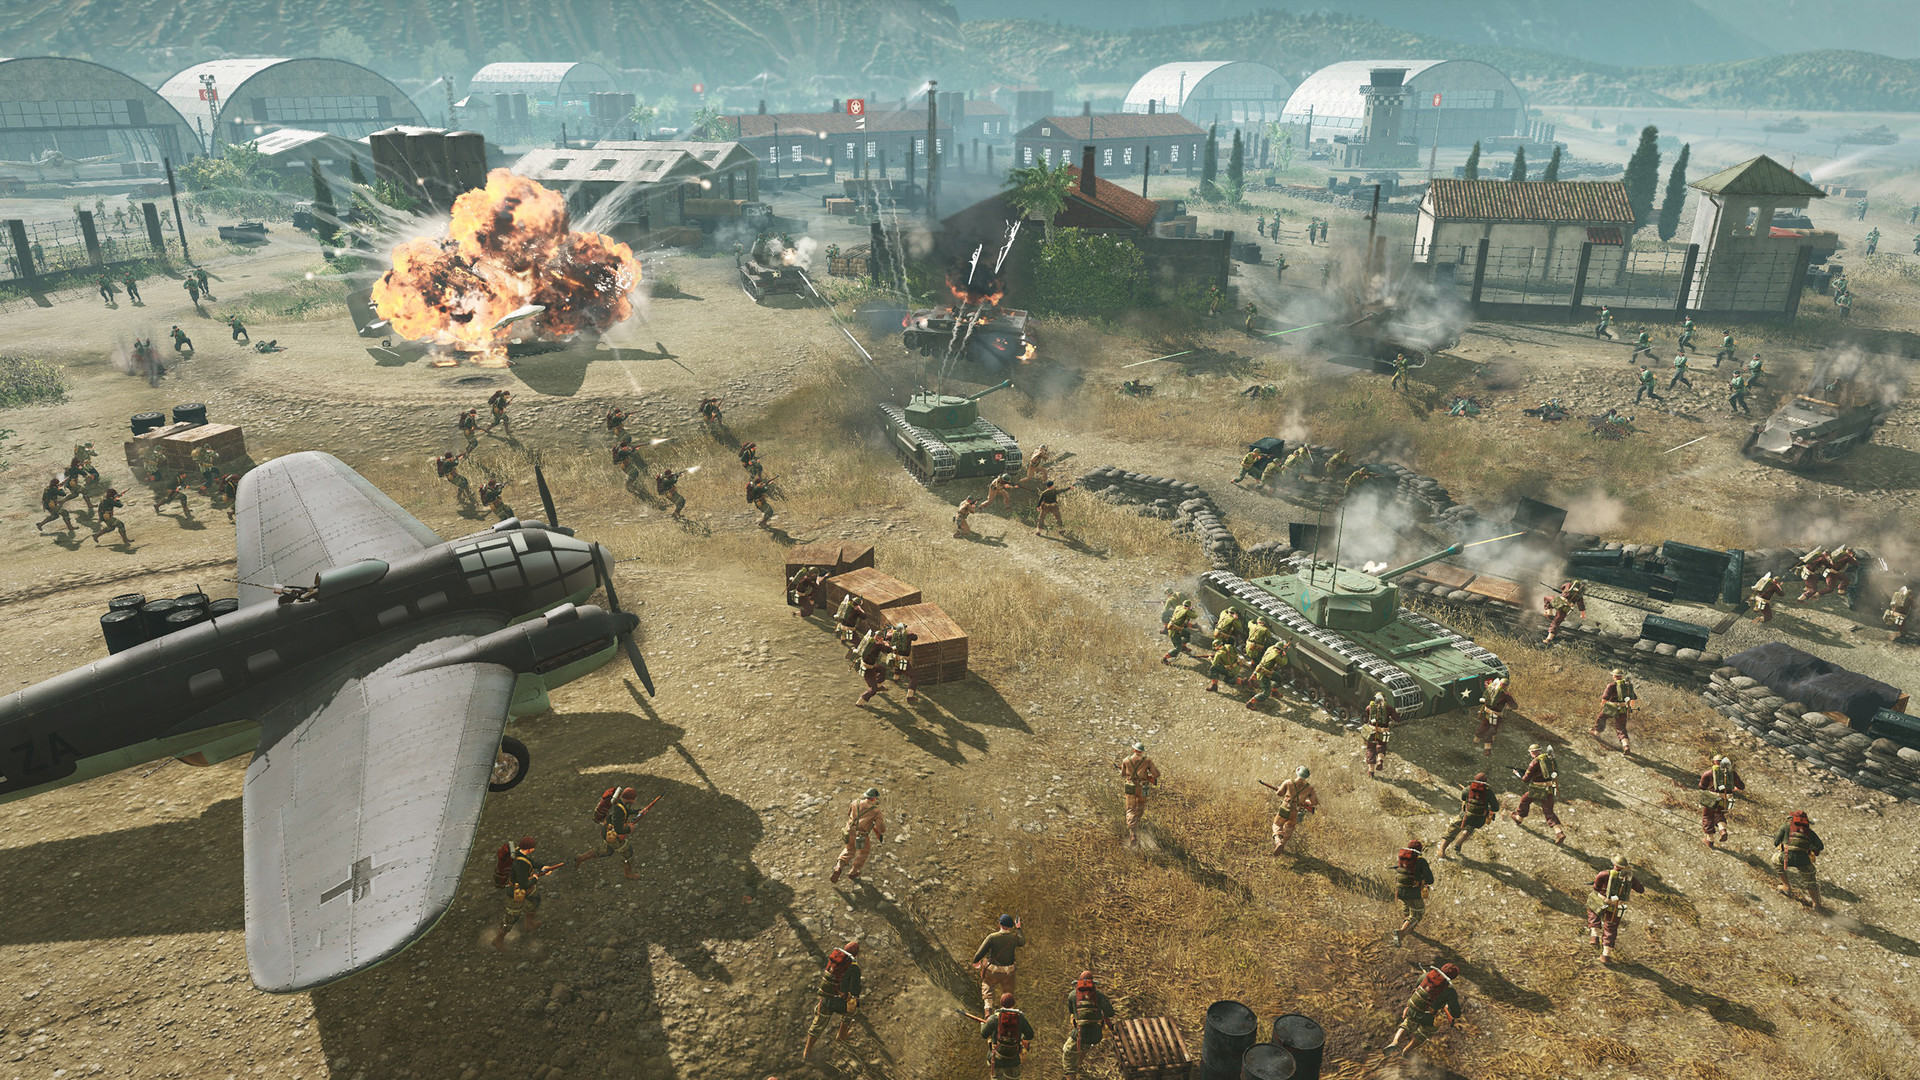 Company of Heroes 3 Release Date, Gameplay Screenshot of Company of Heroes 3 showing a plane and several soldiers